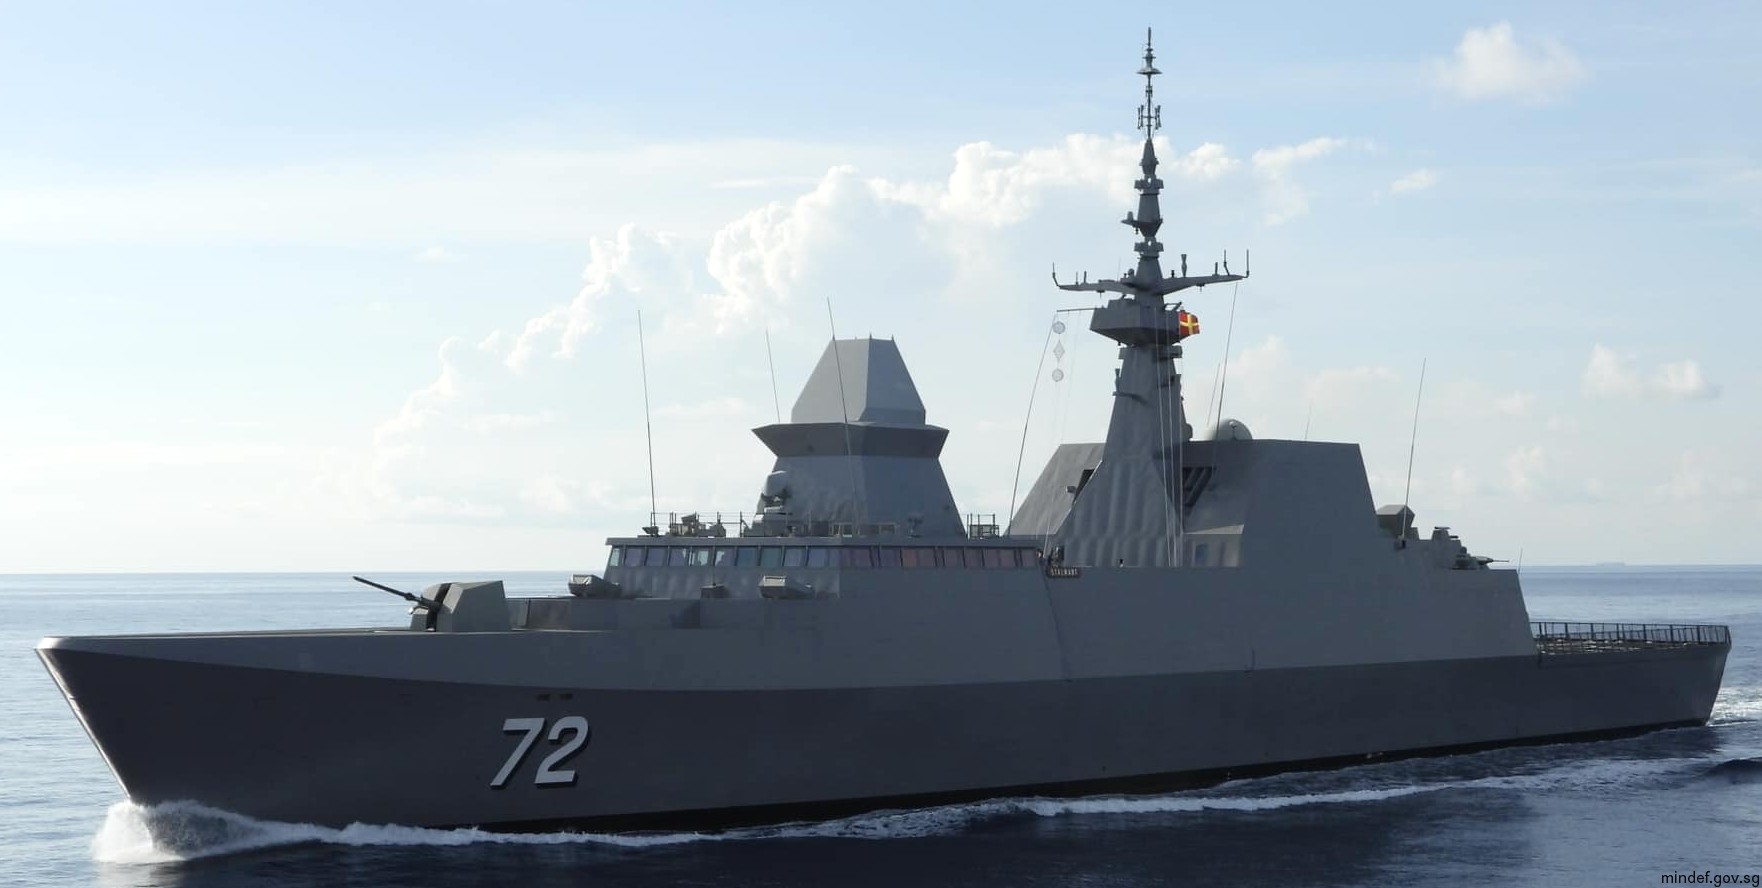 72 rss stalwart formidable class multi-mission missile frigate ffg republic singapore navy 03